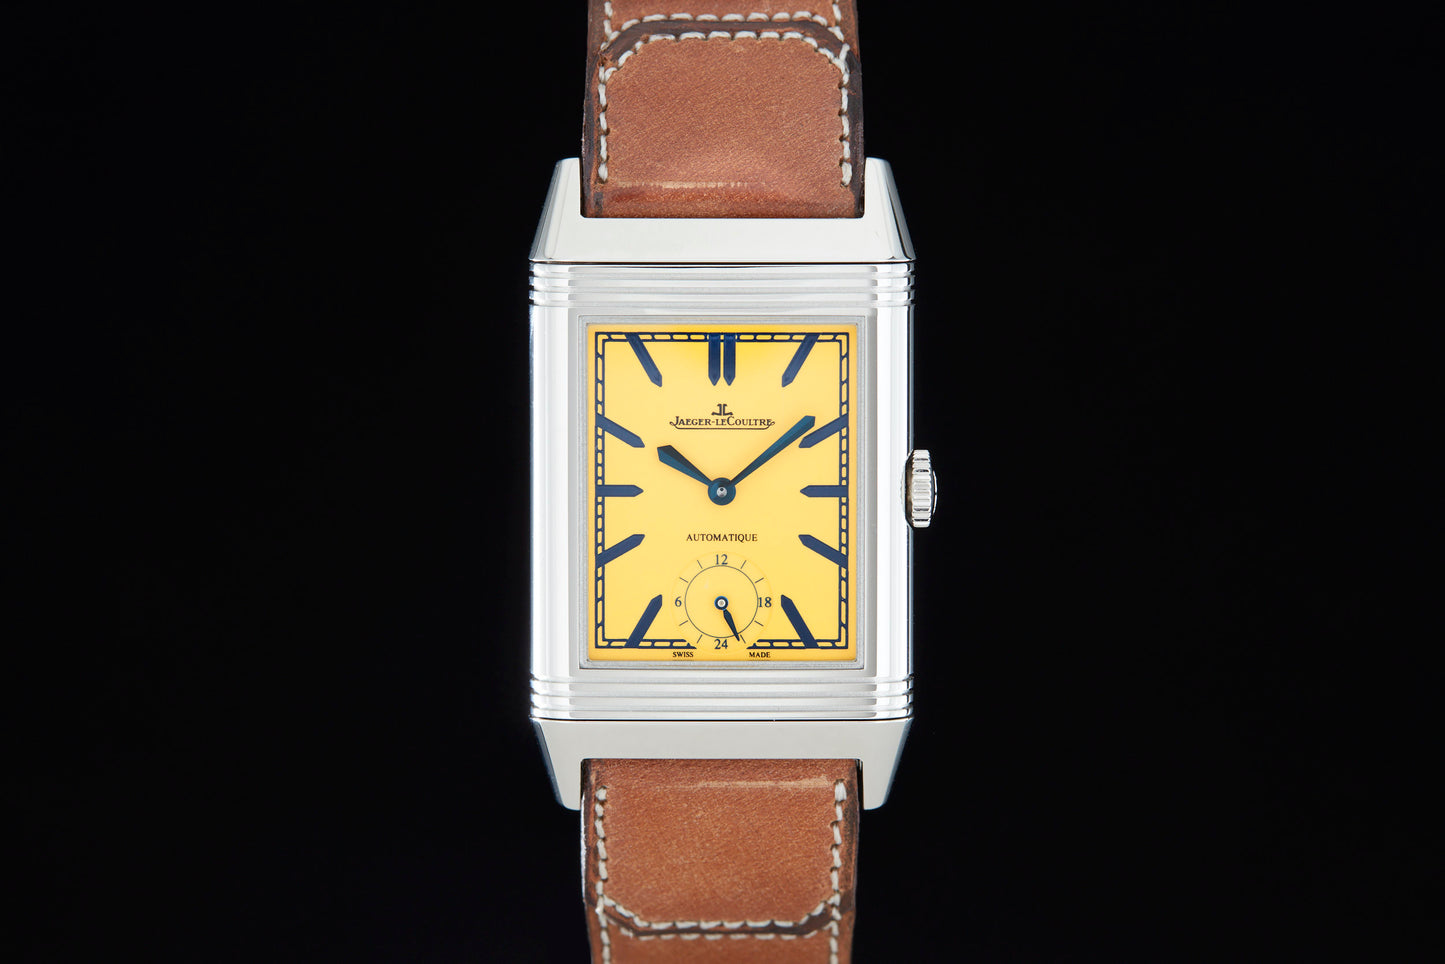 Jaeger-LeCoultre Reverso 1931 "King Rama IX of Thailand" Limited Edition